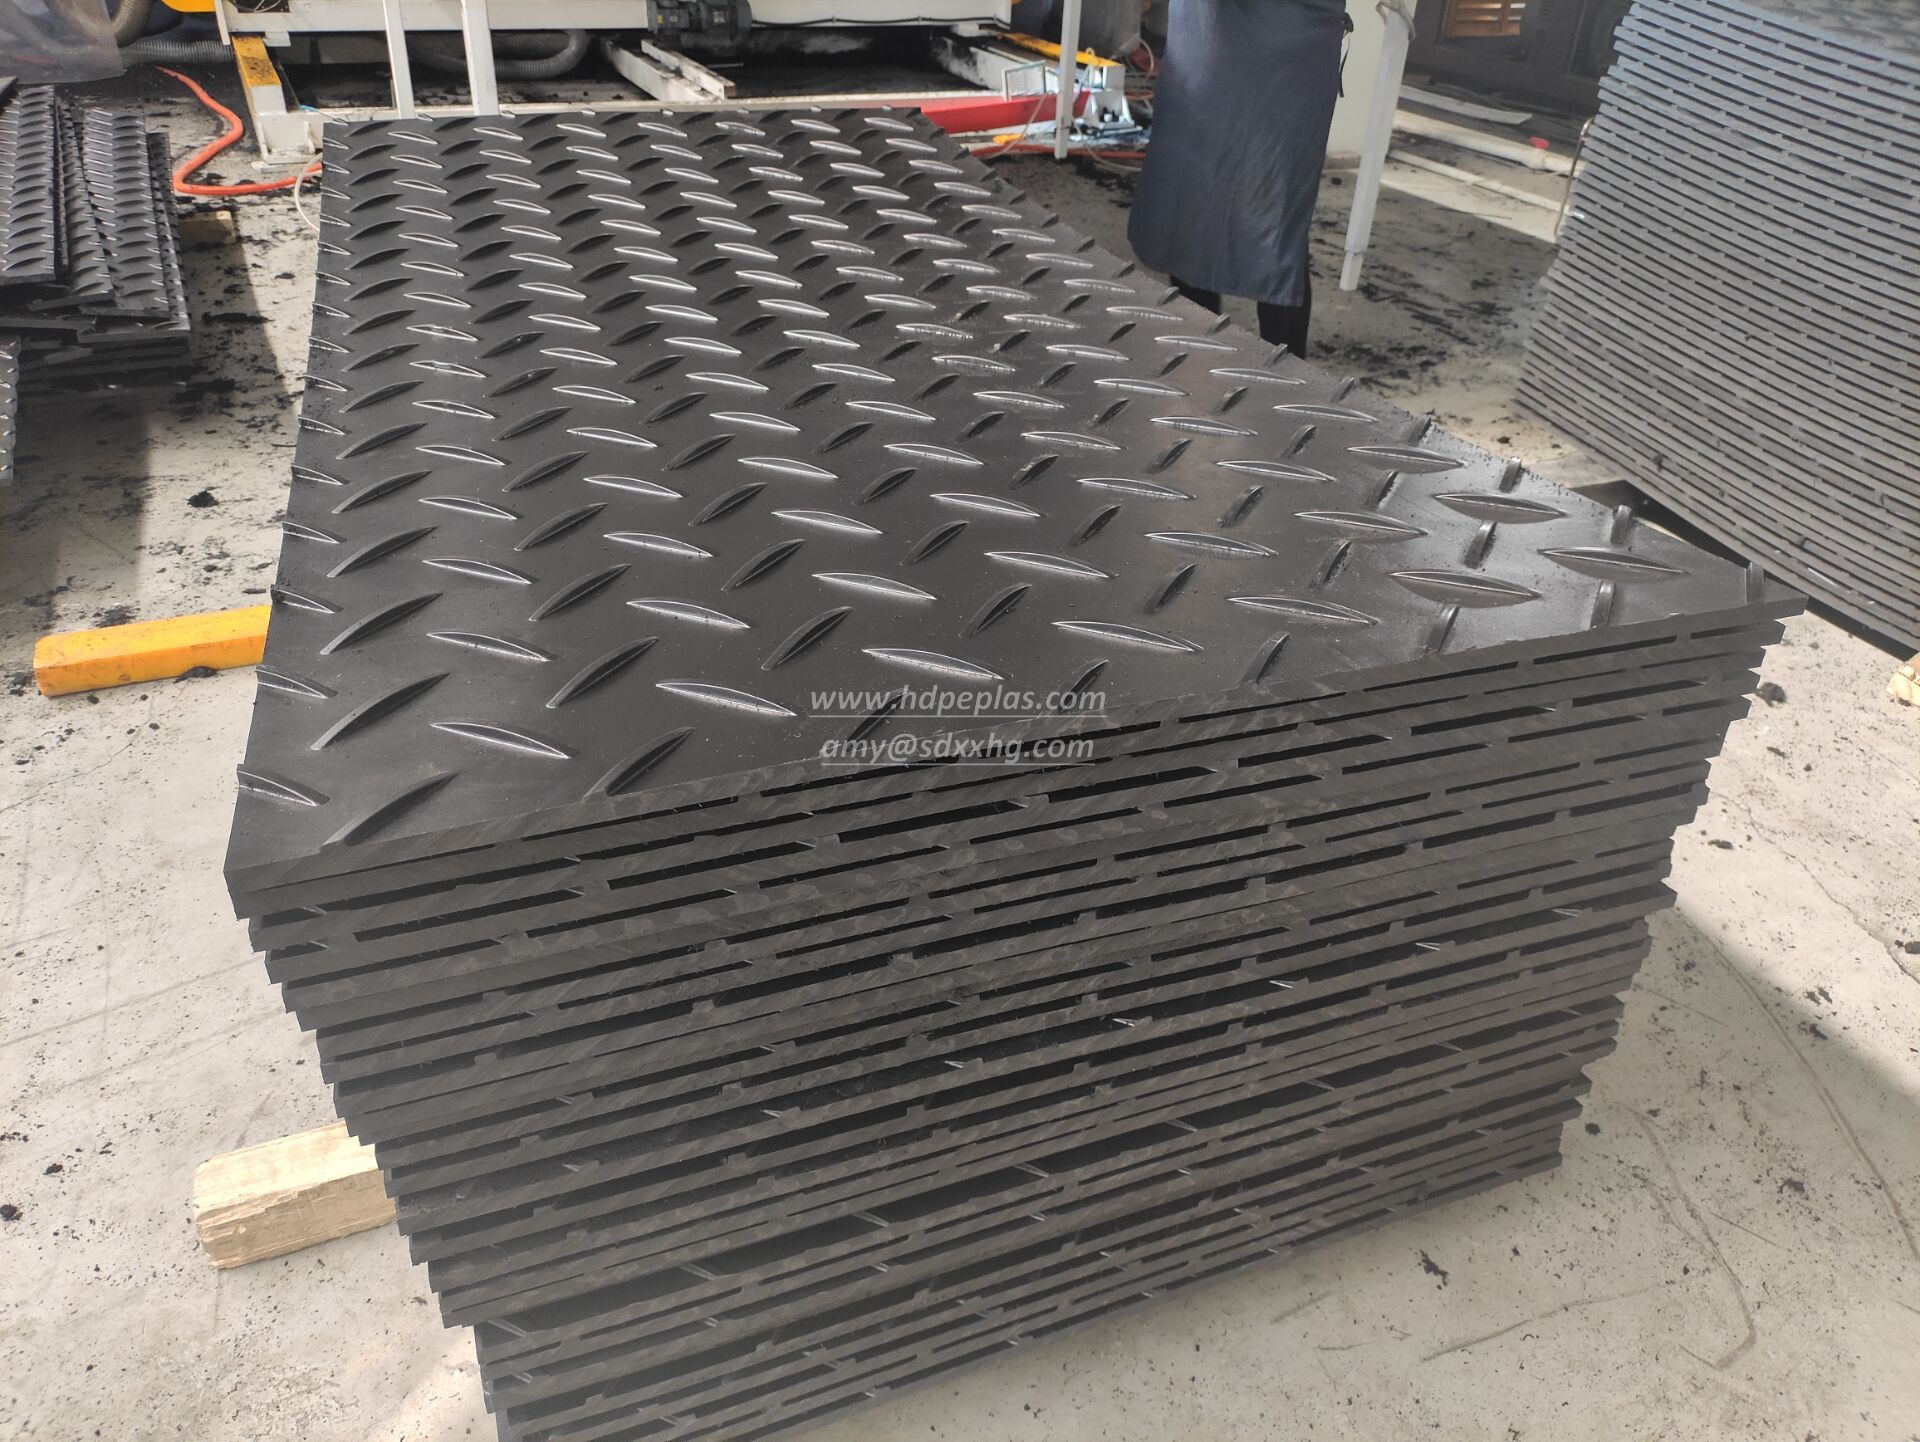 HDPE Mats for Ground Protection, Pathways, Parking and Walkways